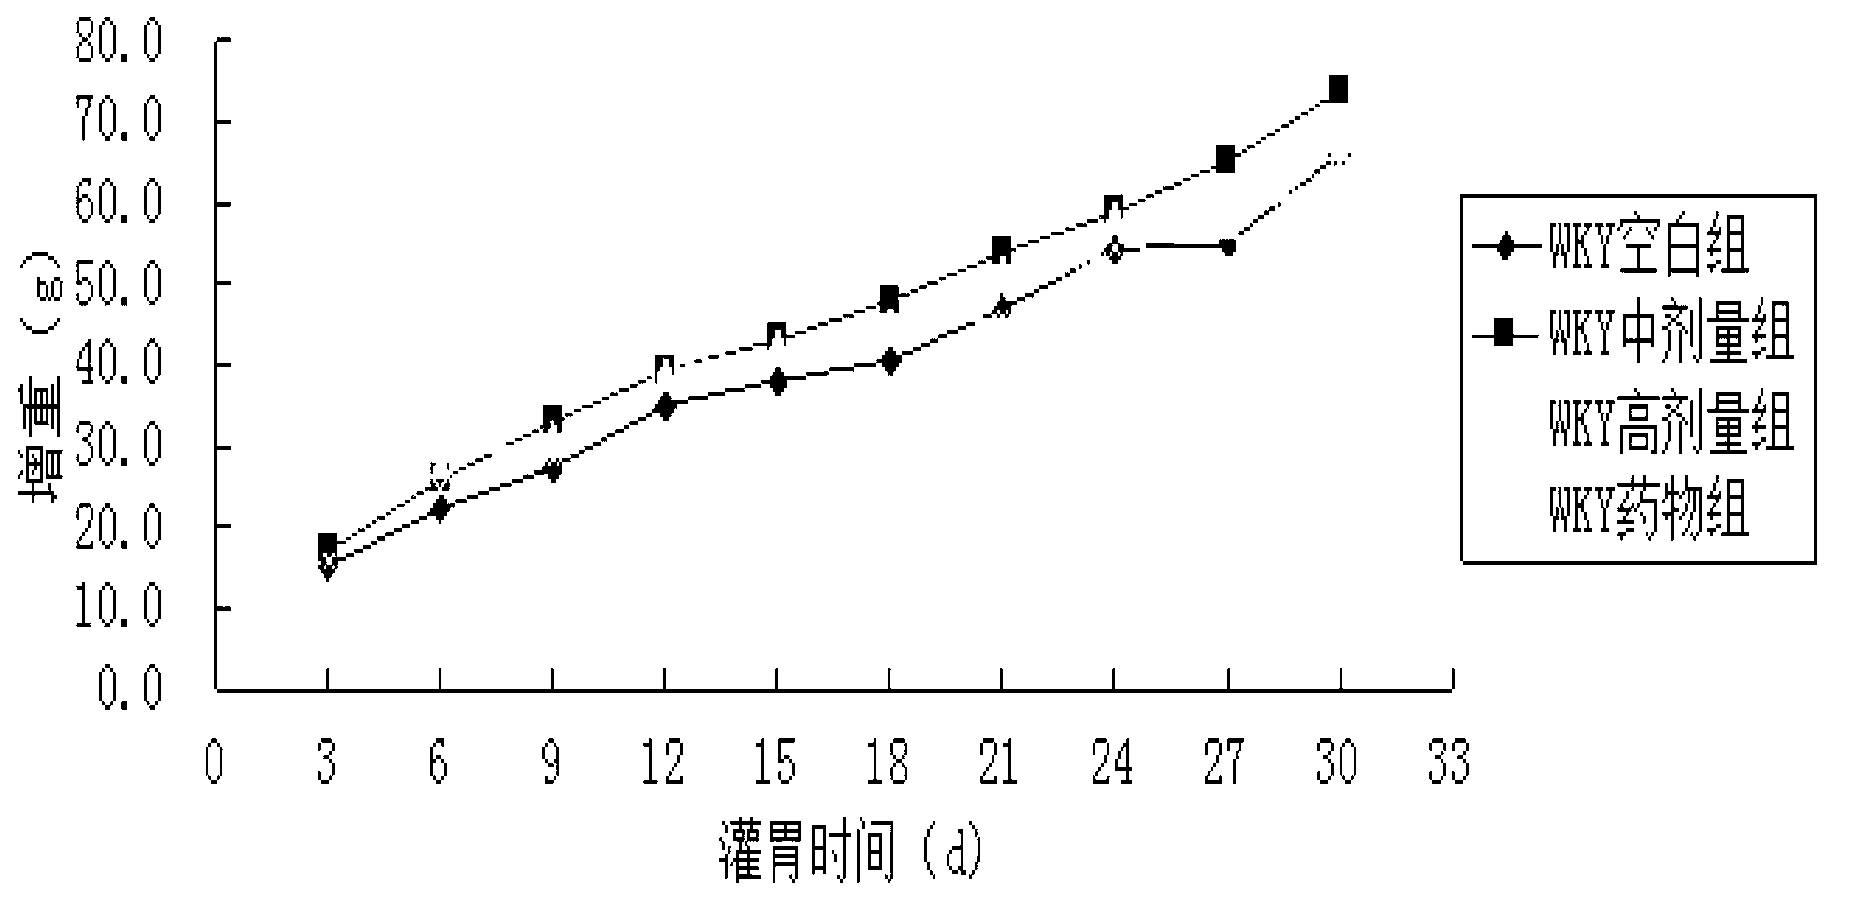 Method for preparing hypotensive substance by using abalone visceral connective tissues